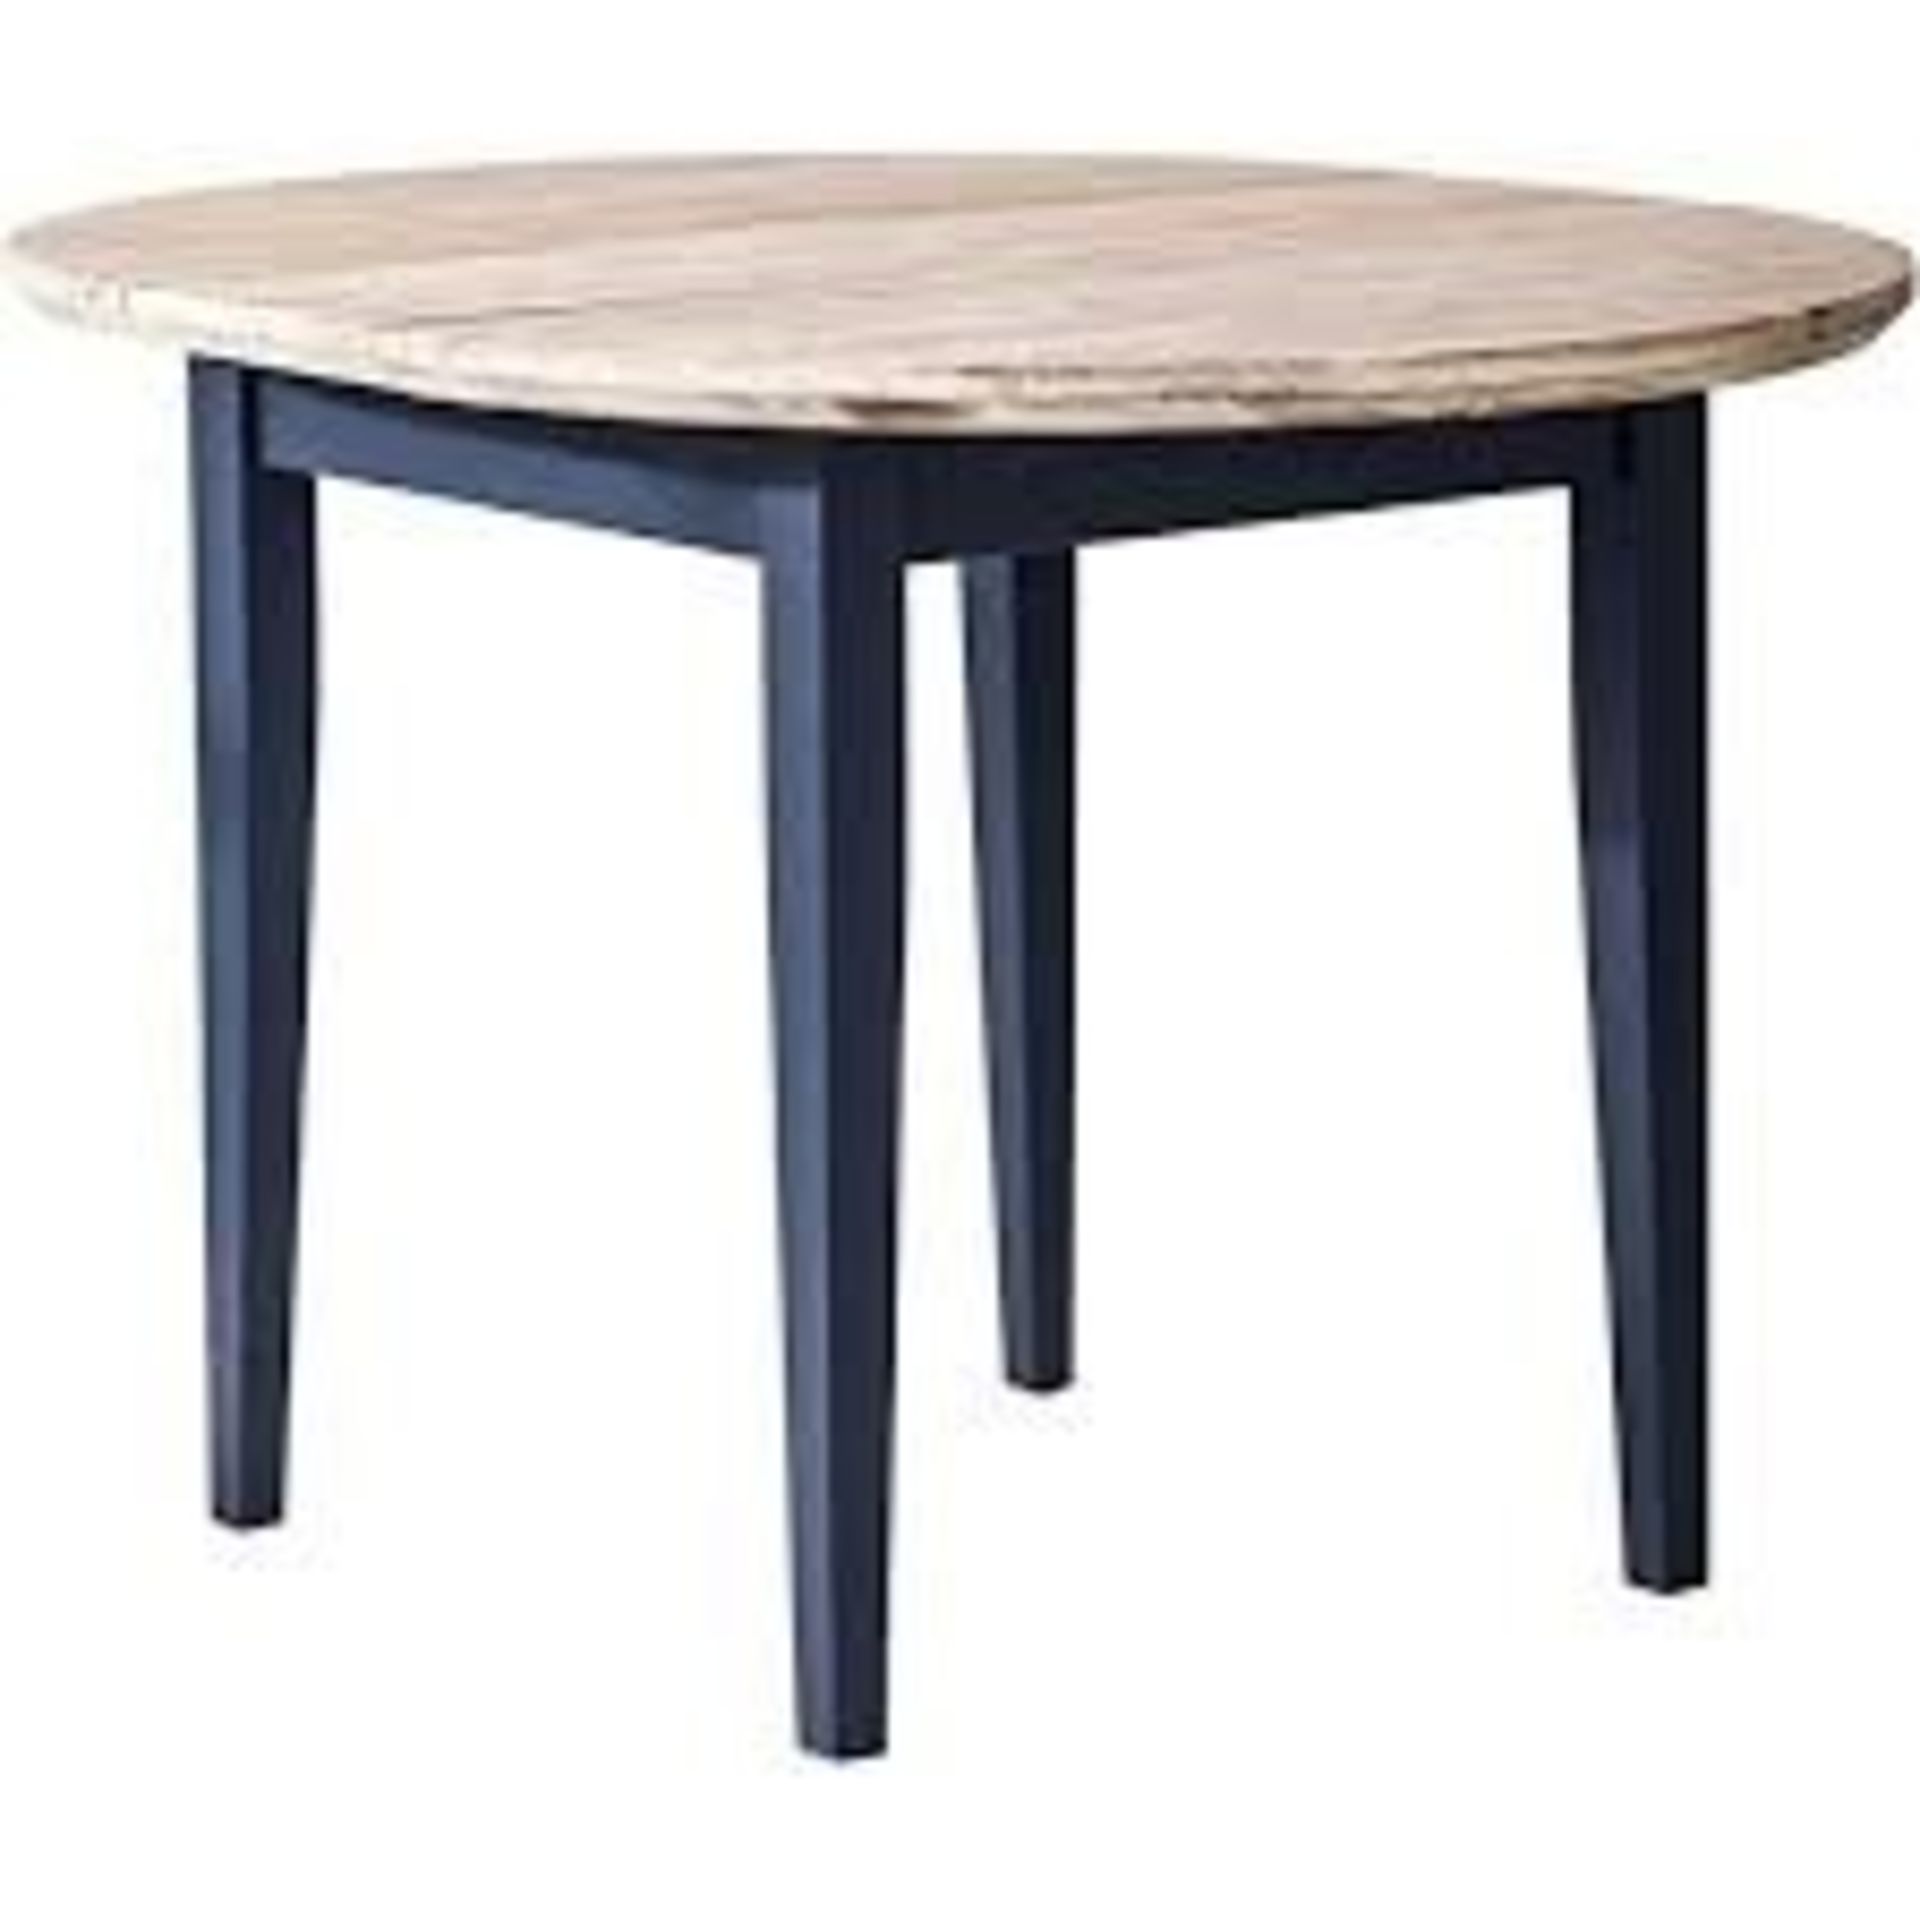 Boxed Oval Fixed Top Pedastal Tables In Natural Gr